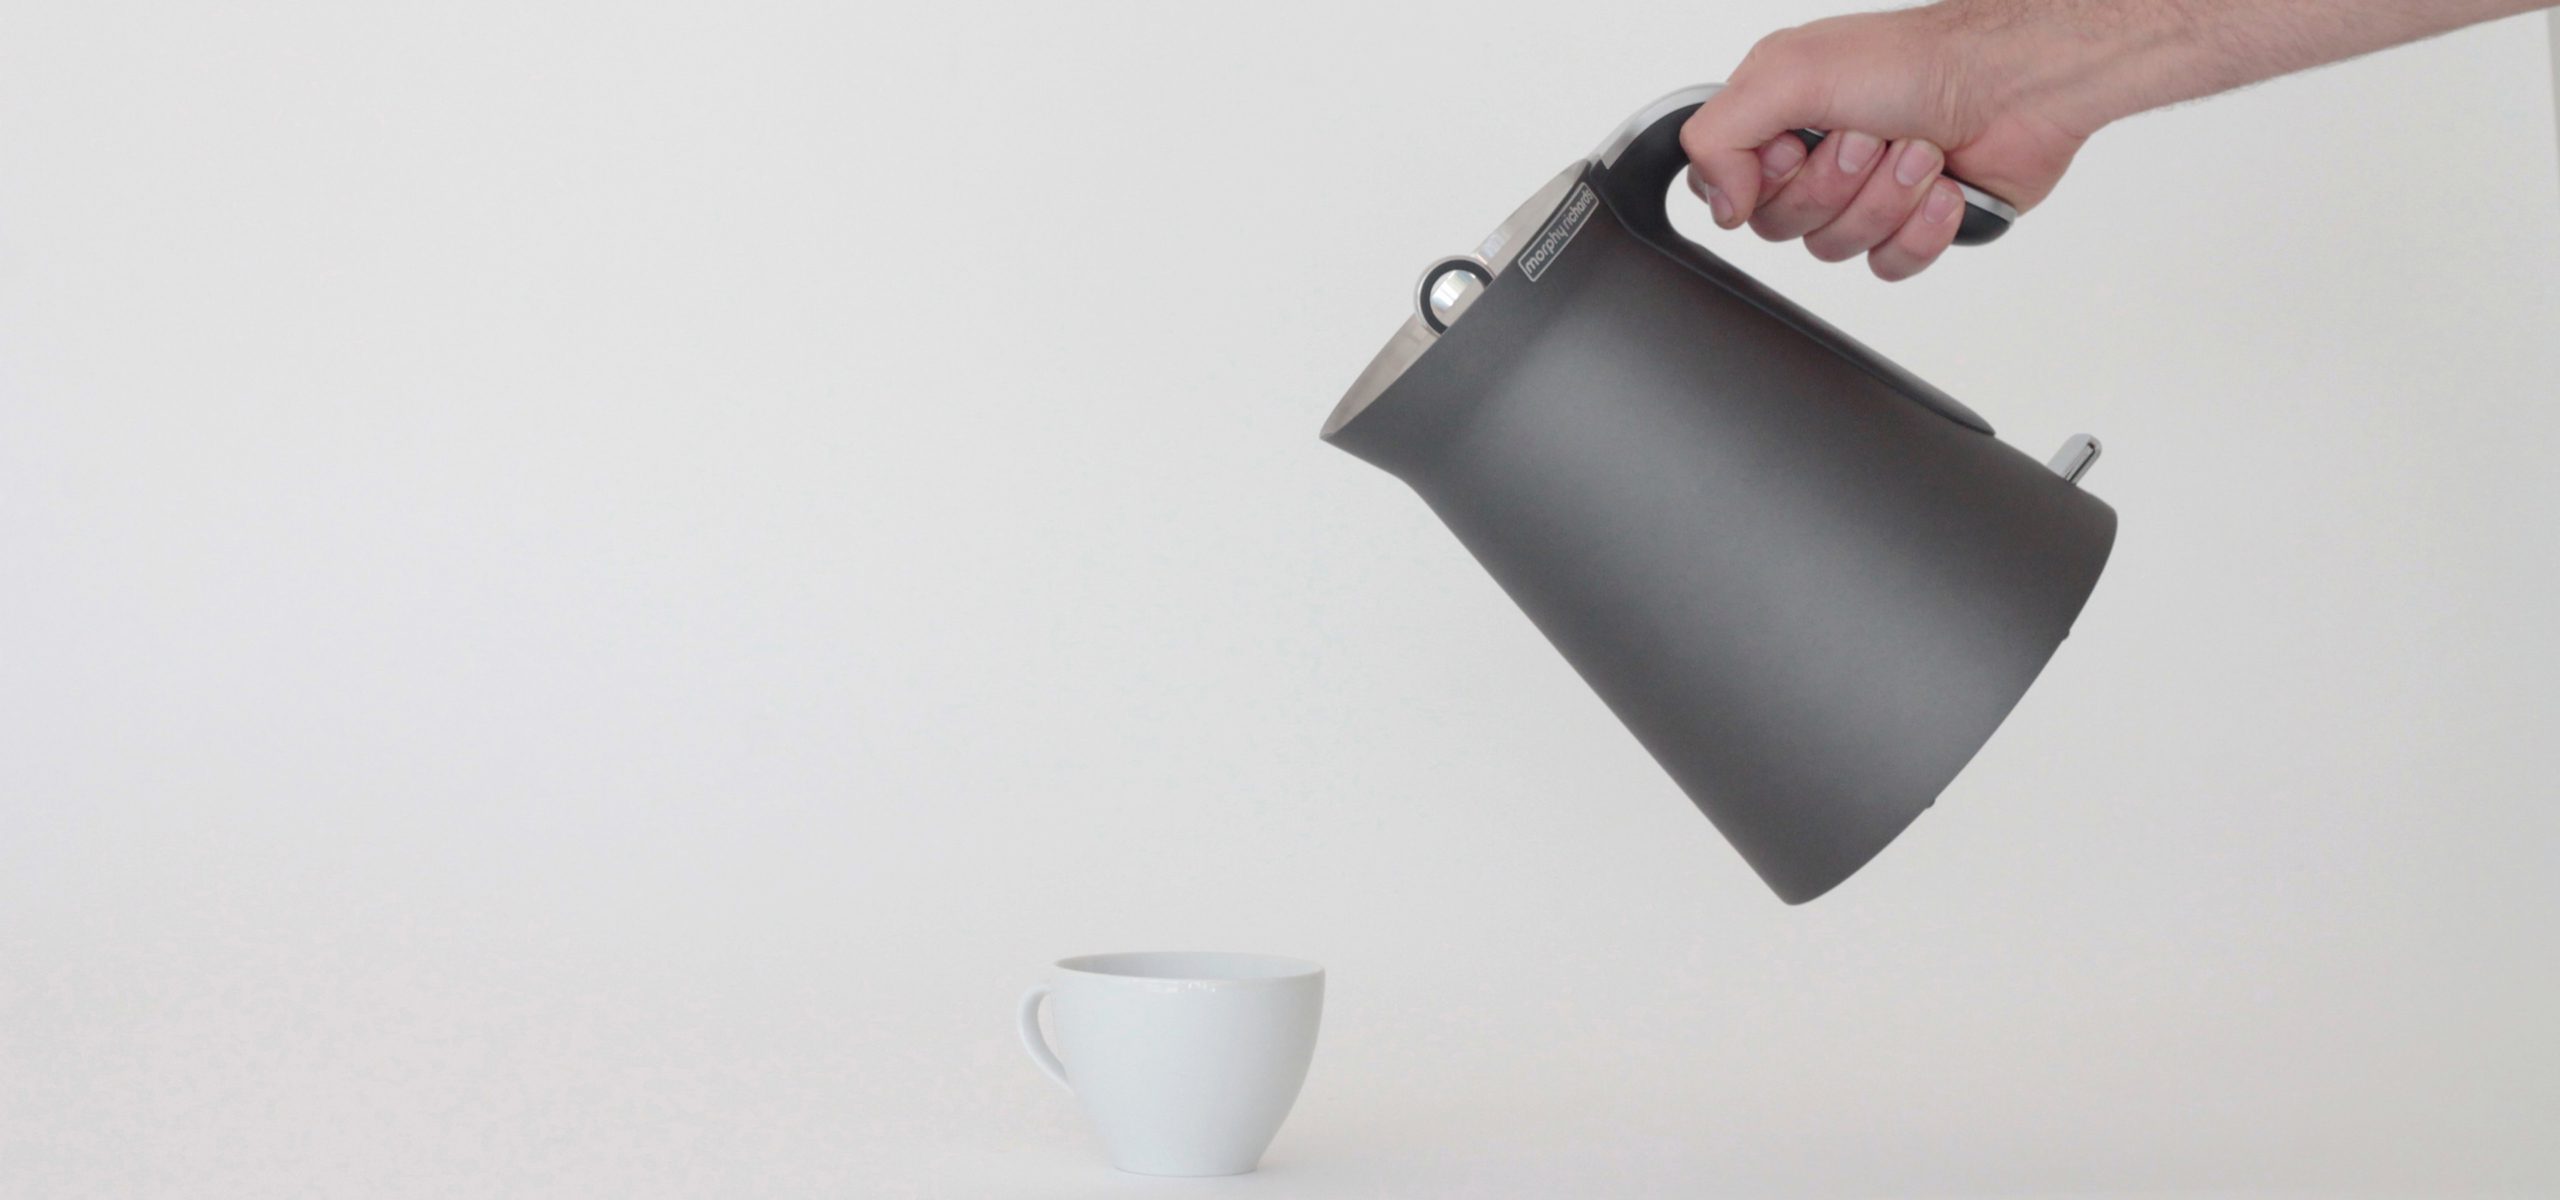 The award winning Authentics kettle by Rodd design is a prime example of the power of product brand language